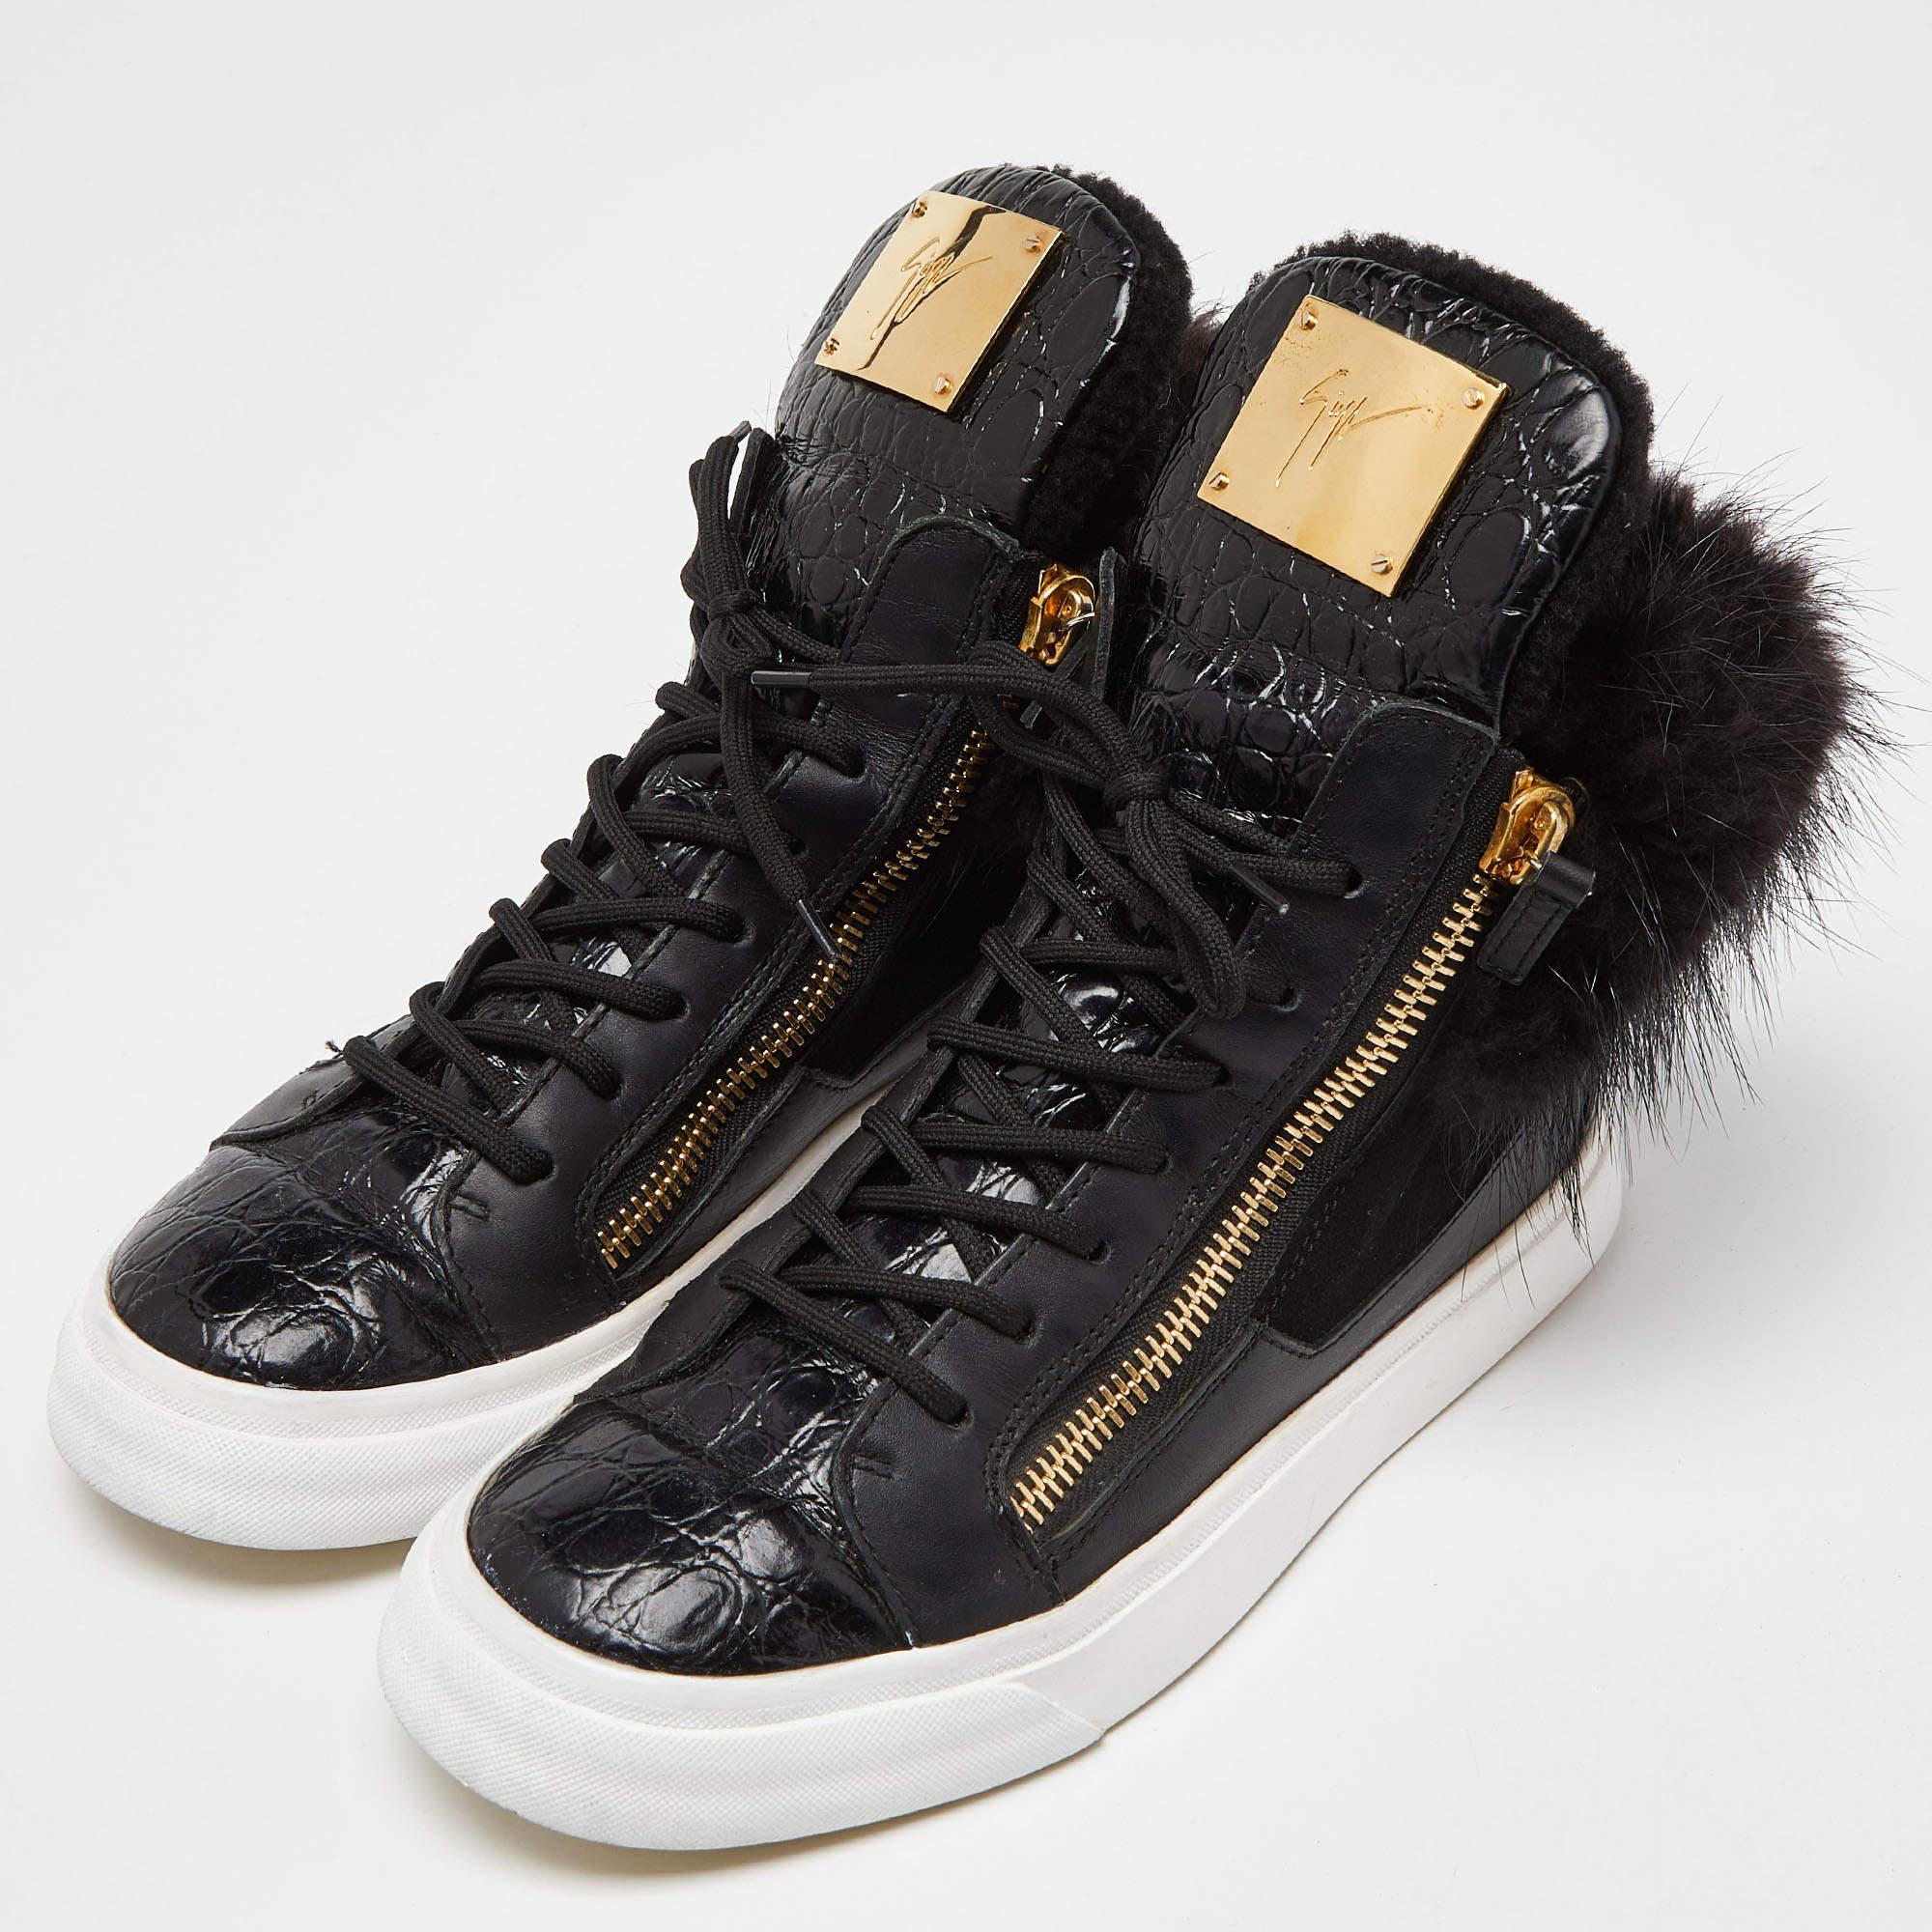 Elevate your footwear game with these Giuseppe Zanotti sneakers. Combining high-end aesthetics and unmatched comfort, these sneakers are a symbol of modern luxury and impeccable taste.

